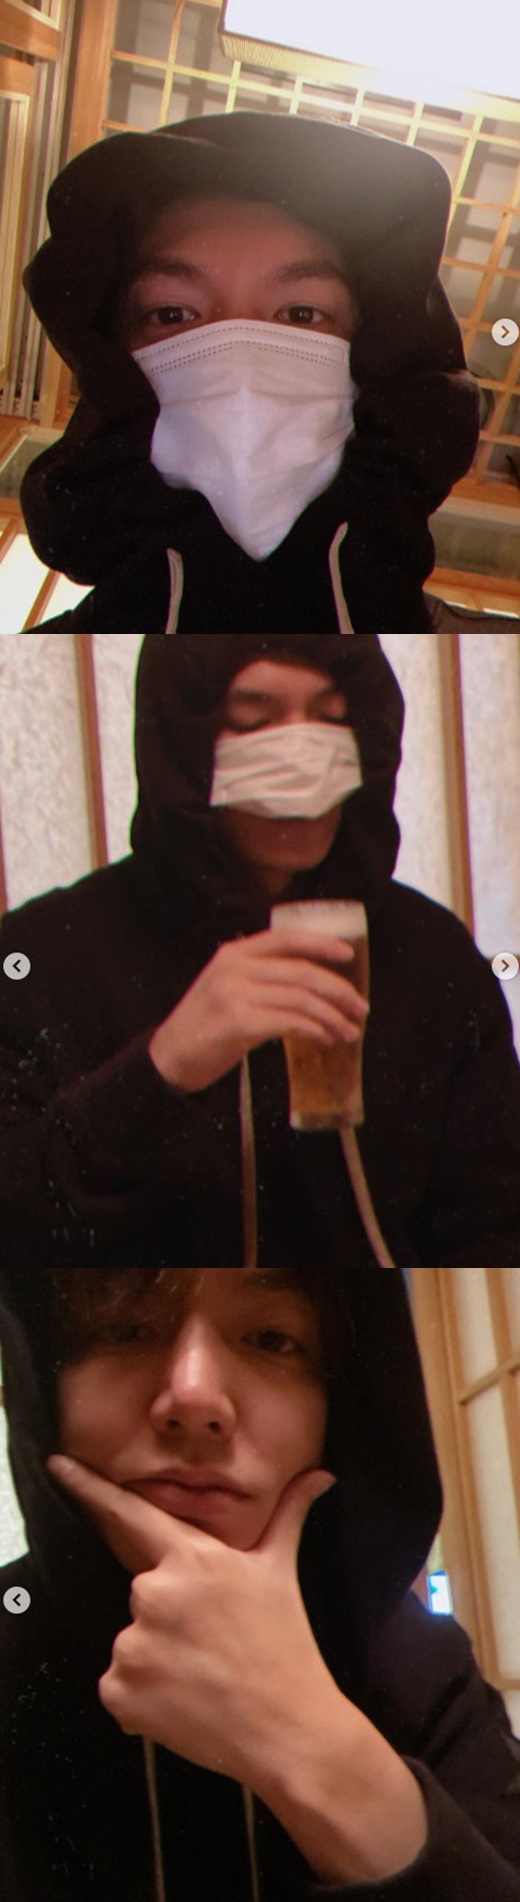 Actor Lee Min-ho attracted attention with his unique Beer drinking method.Lee Min-ho posted a photo on his Instagram on Tuesday.The photo showed Lee Min-ho, who found the bar, especially Lee Min-ho, who caught the eye by using Mask when drinking Beer in time for the COVID-19 era.He opened his mouth slightly, without taking off Mask, and drank Beer.Netizens responded to this appearance by saying, I want to be happy and healthy, cute, and good idea.